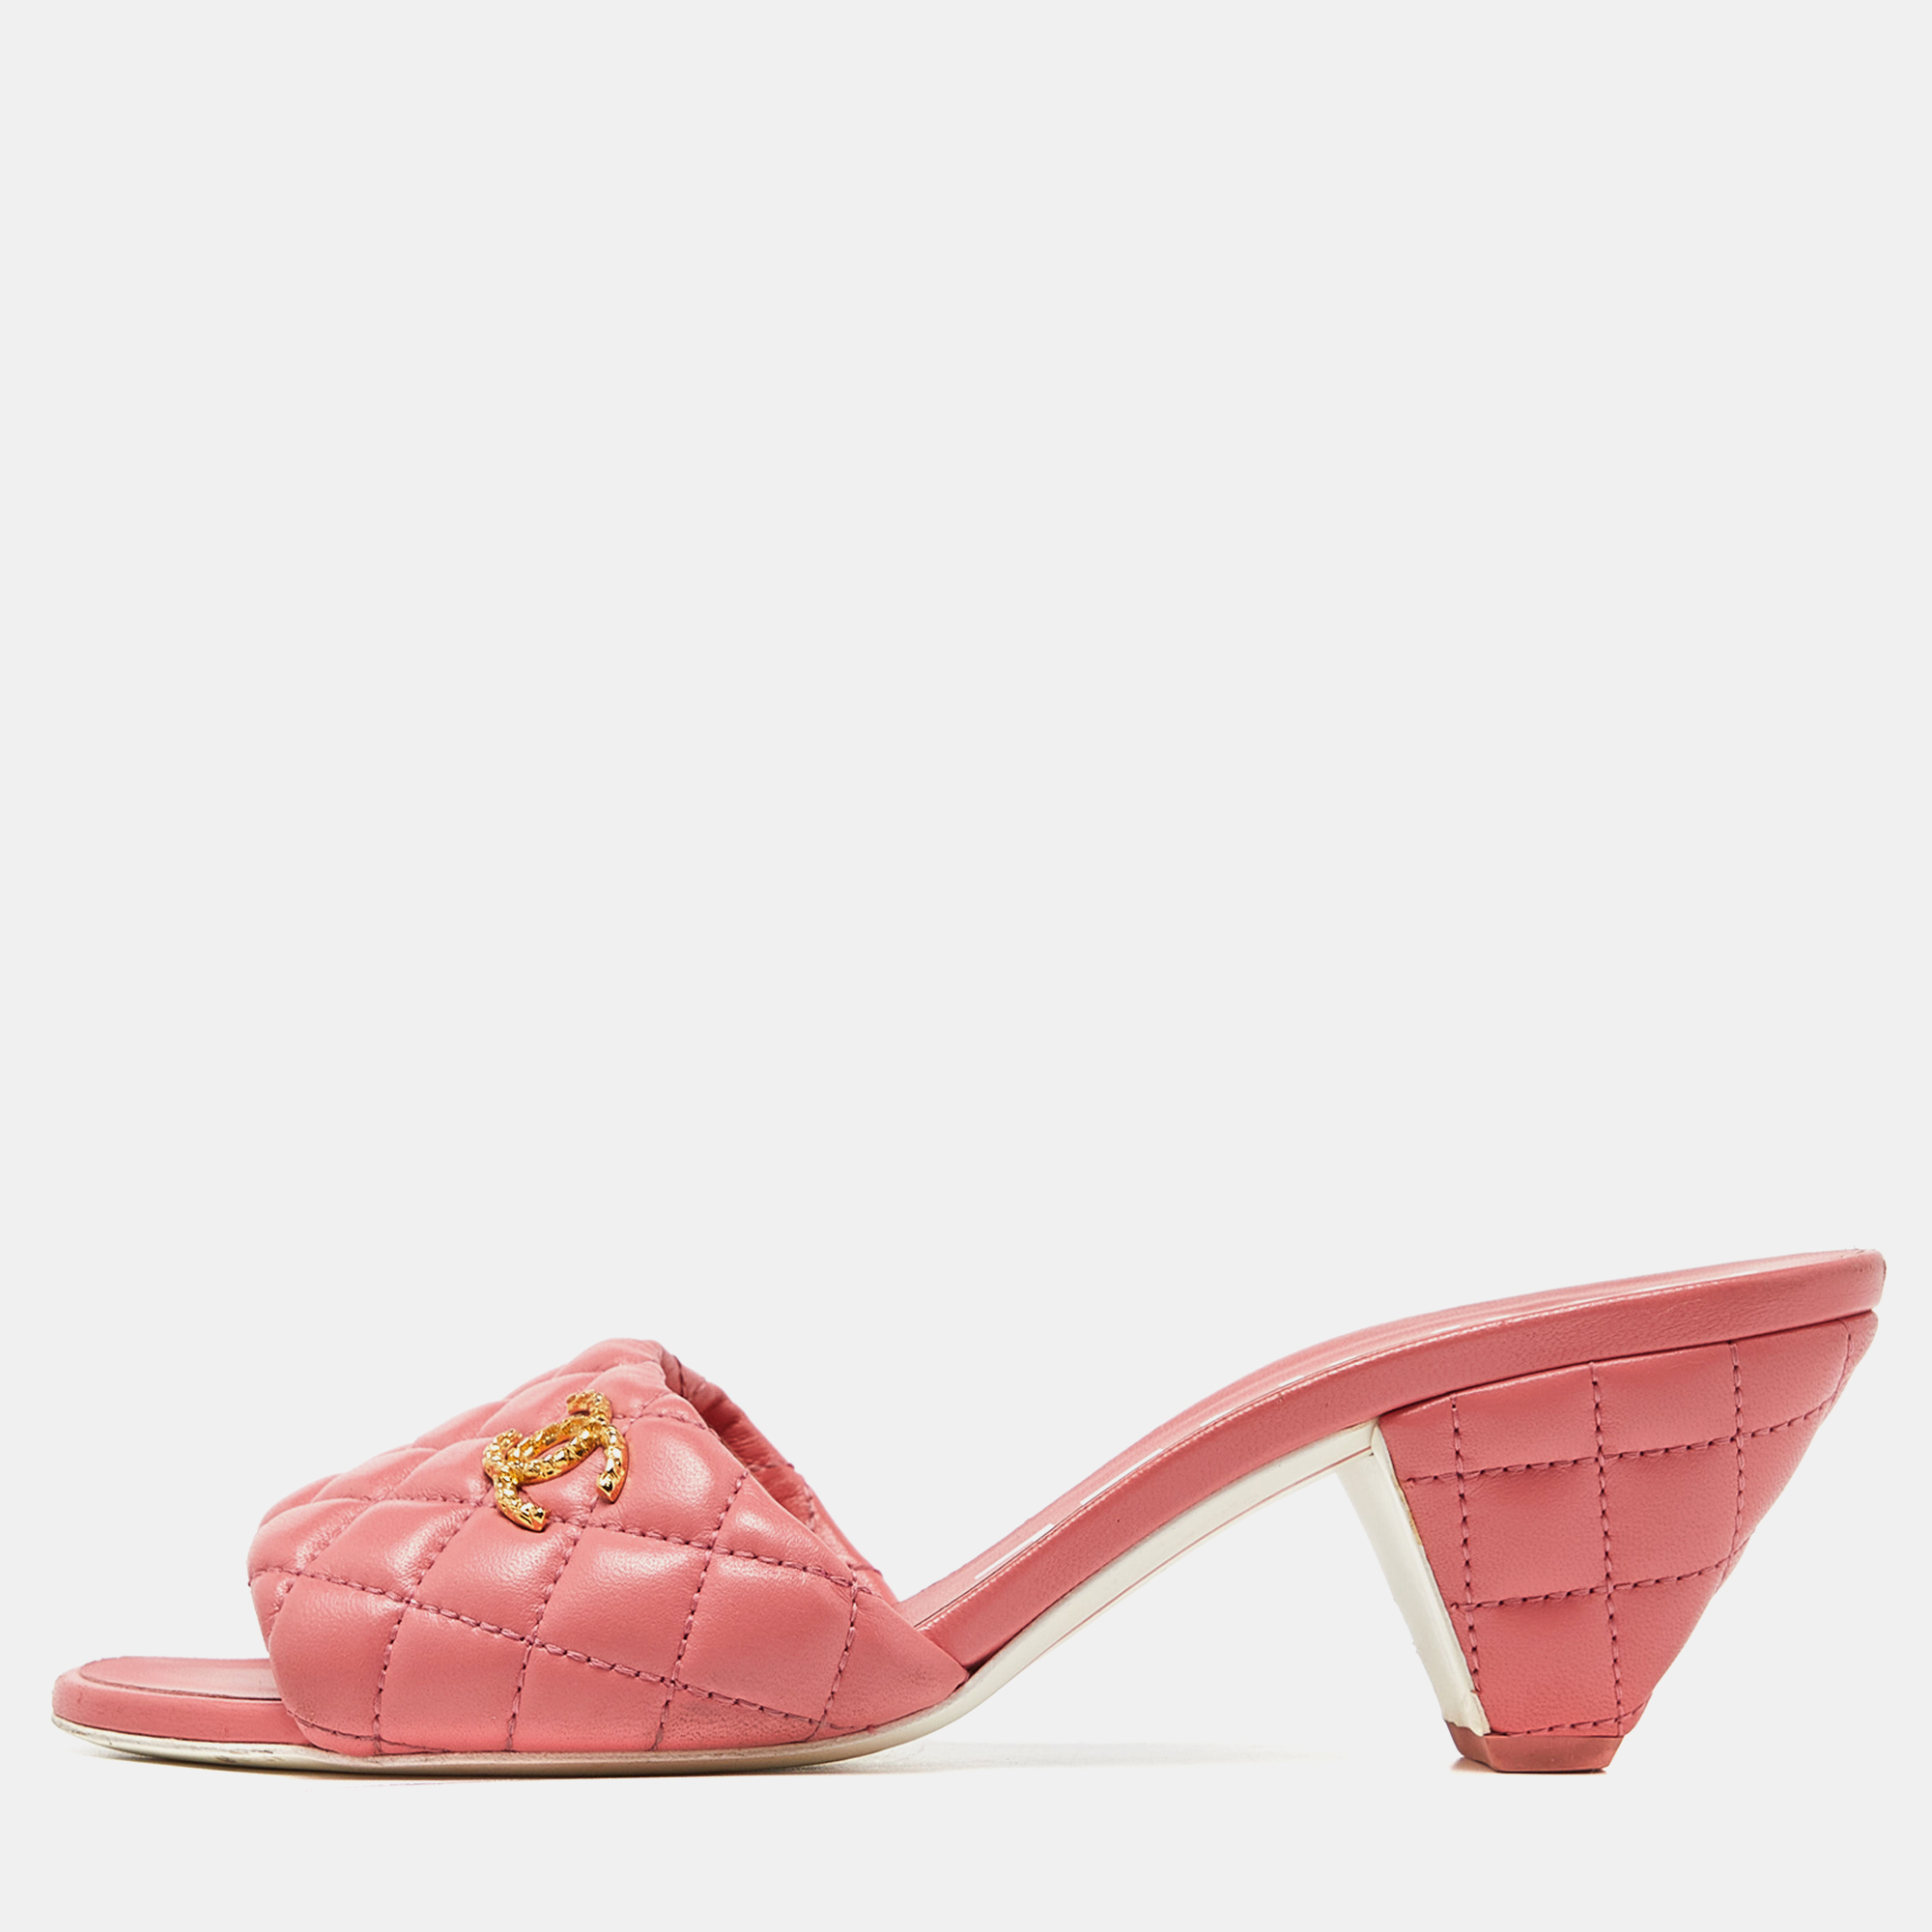 Chanel pink quilted leather cc open toe slide sandals size 38.5